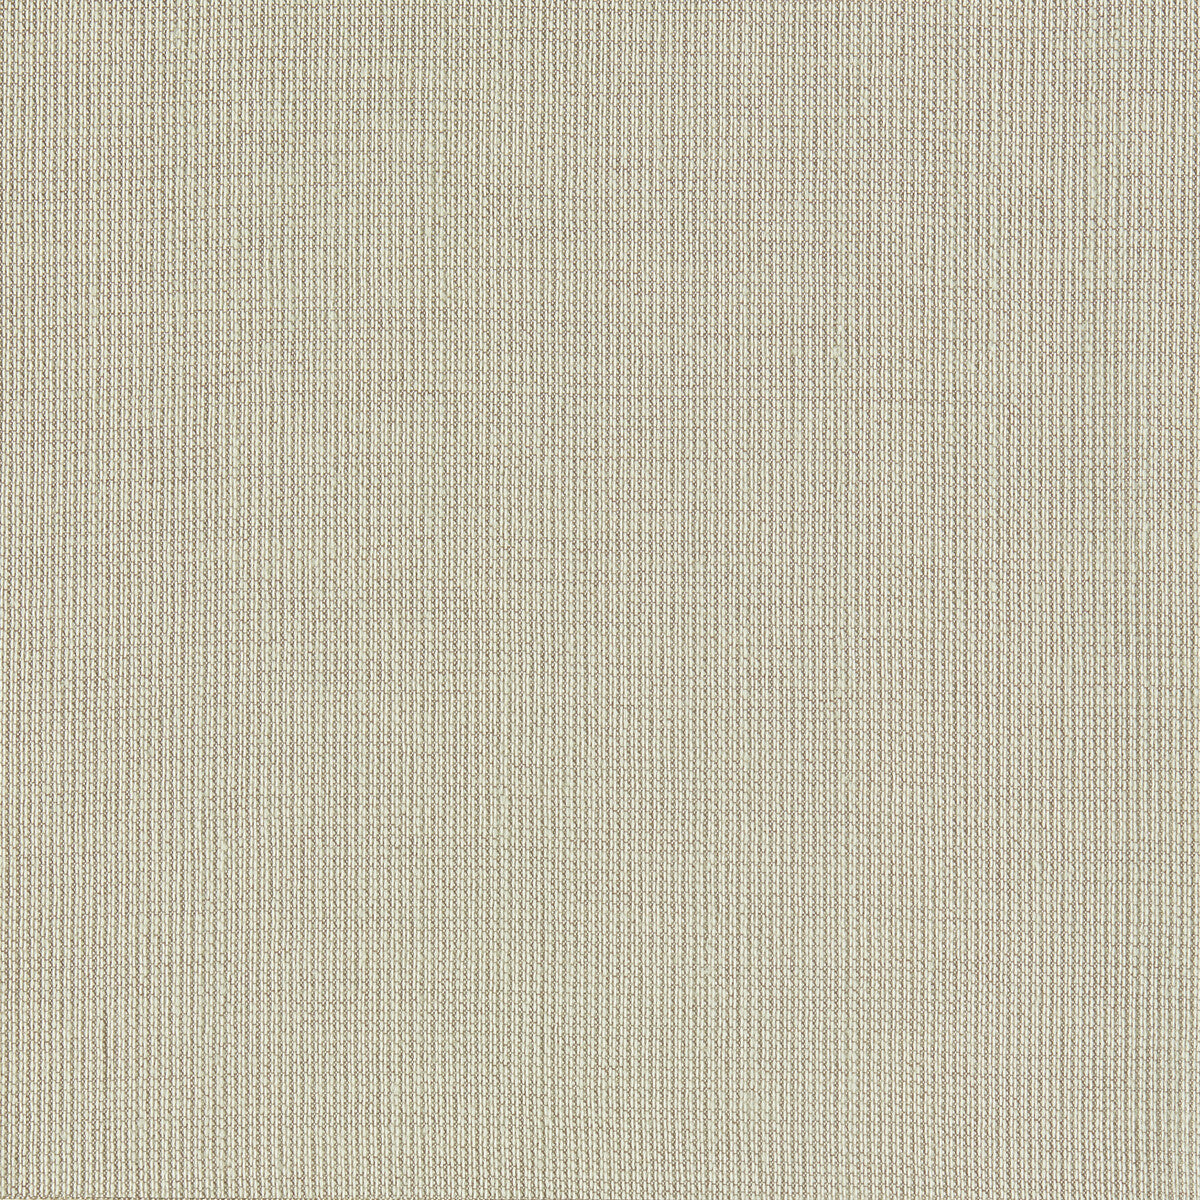 Pura fabric in taupe color - pattern F1408/07.CAC.0 - by Clarke And Clarke in the Clarke &amp; Clarke Natura collection